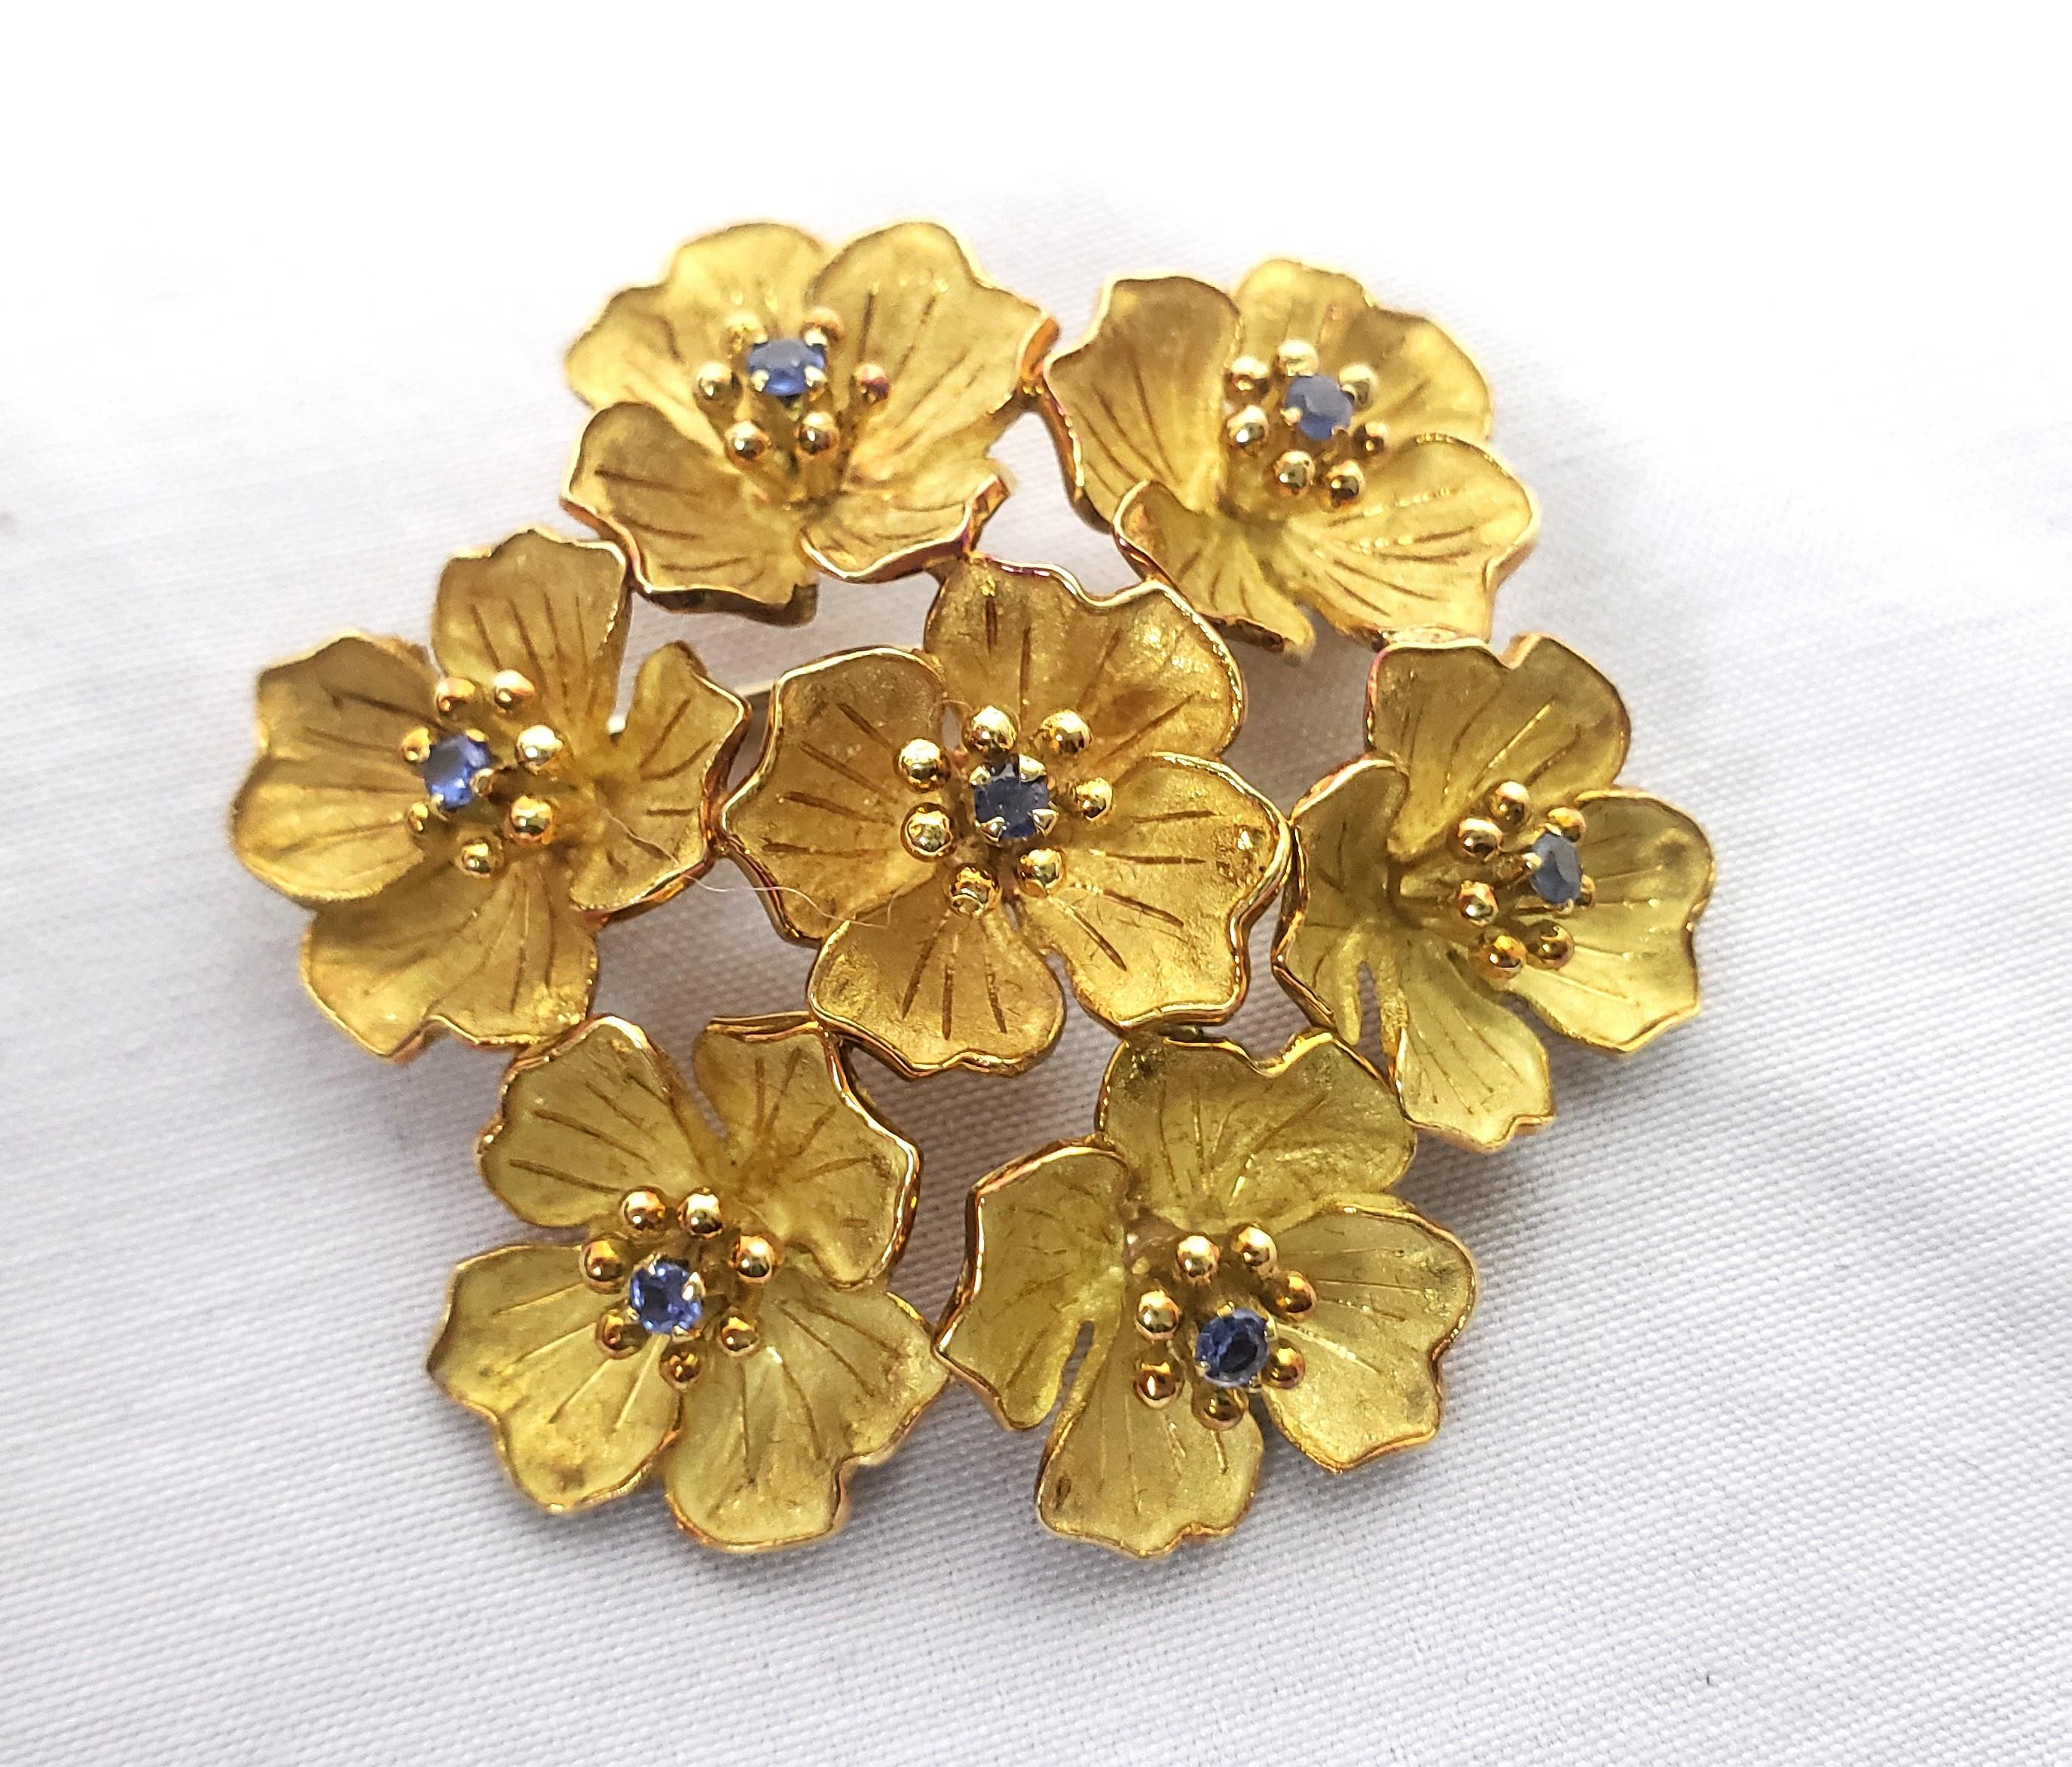 Hand-Crafted Antique Italian 18 Karat Yellow Gold & Saphire Floral Brooch & Earrings Set  For Sale